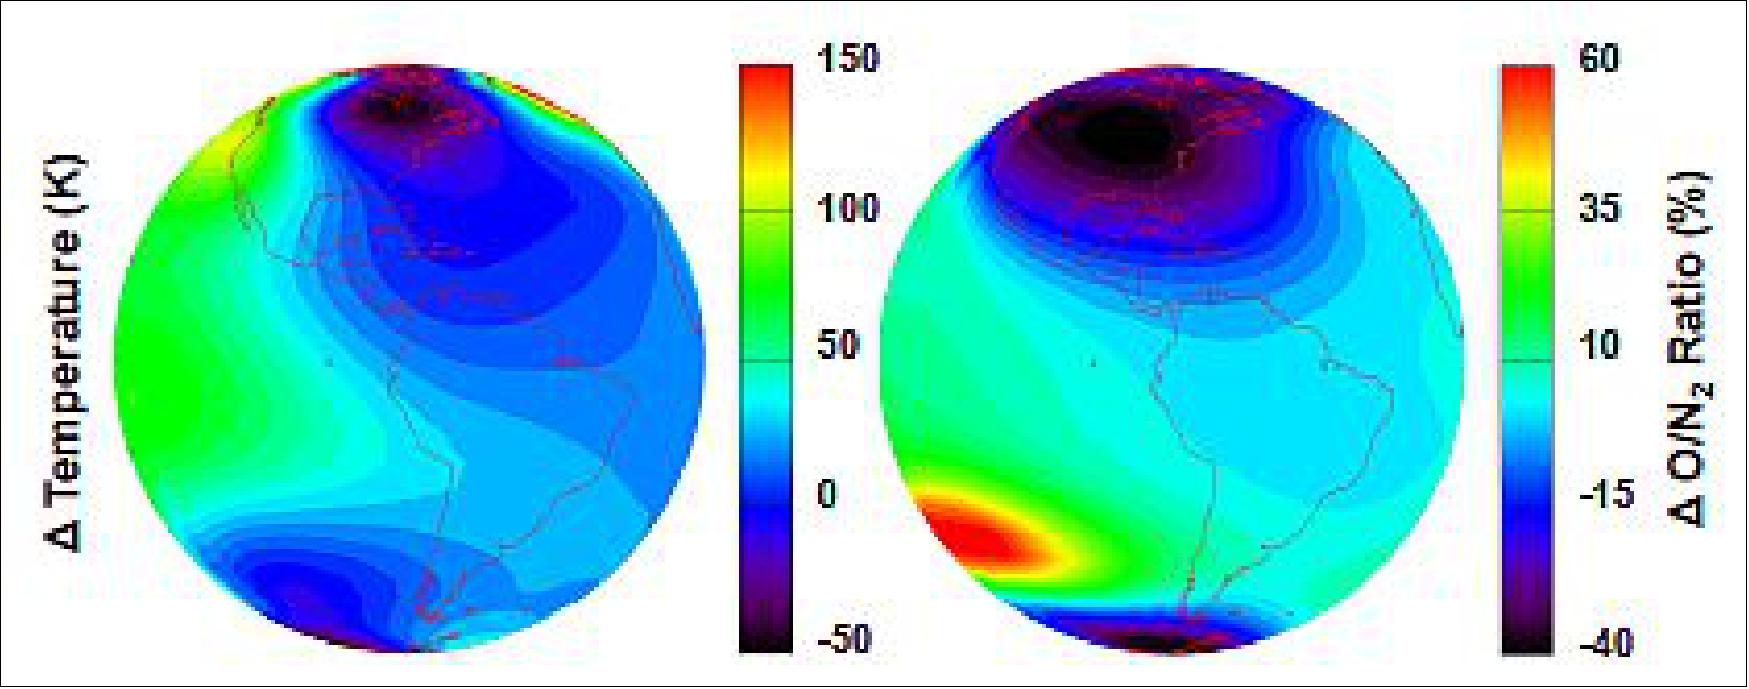 Figure 36: Modeled changes (from TIEGCM) in upper atmosphere during a geomagnetic storm, one example of the space weather effects that GOLD will observe (image credit: GOLD Team)